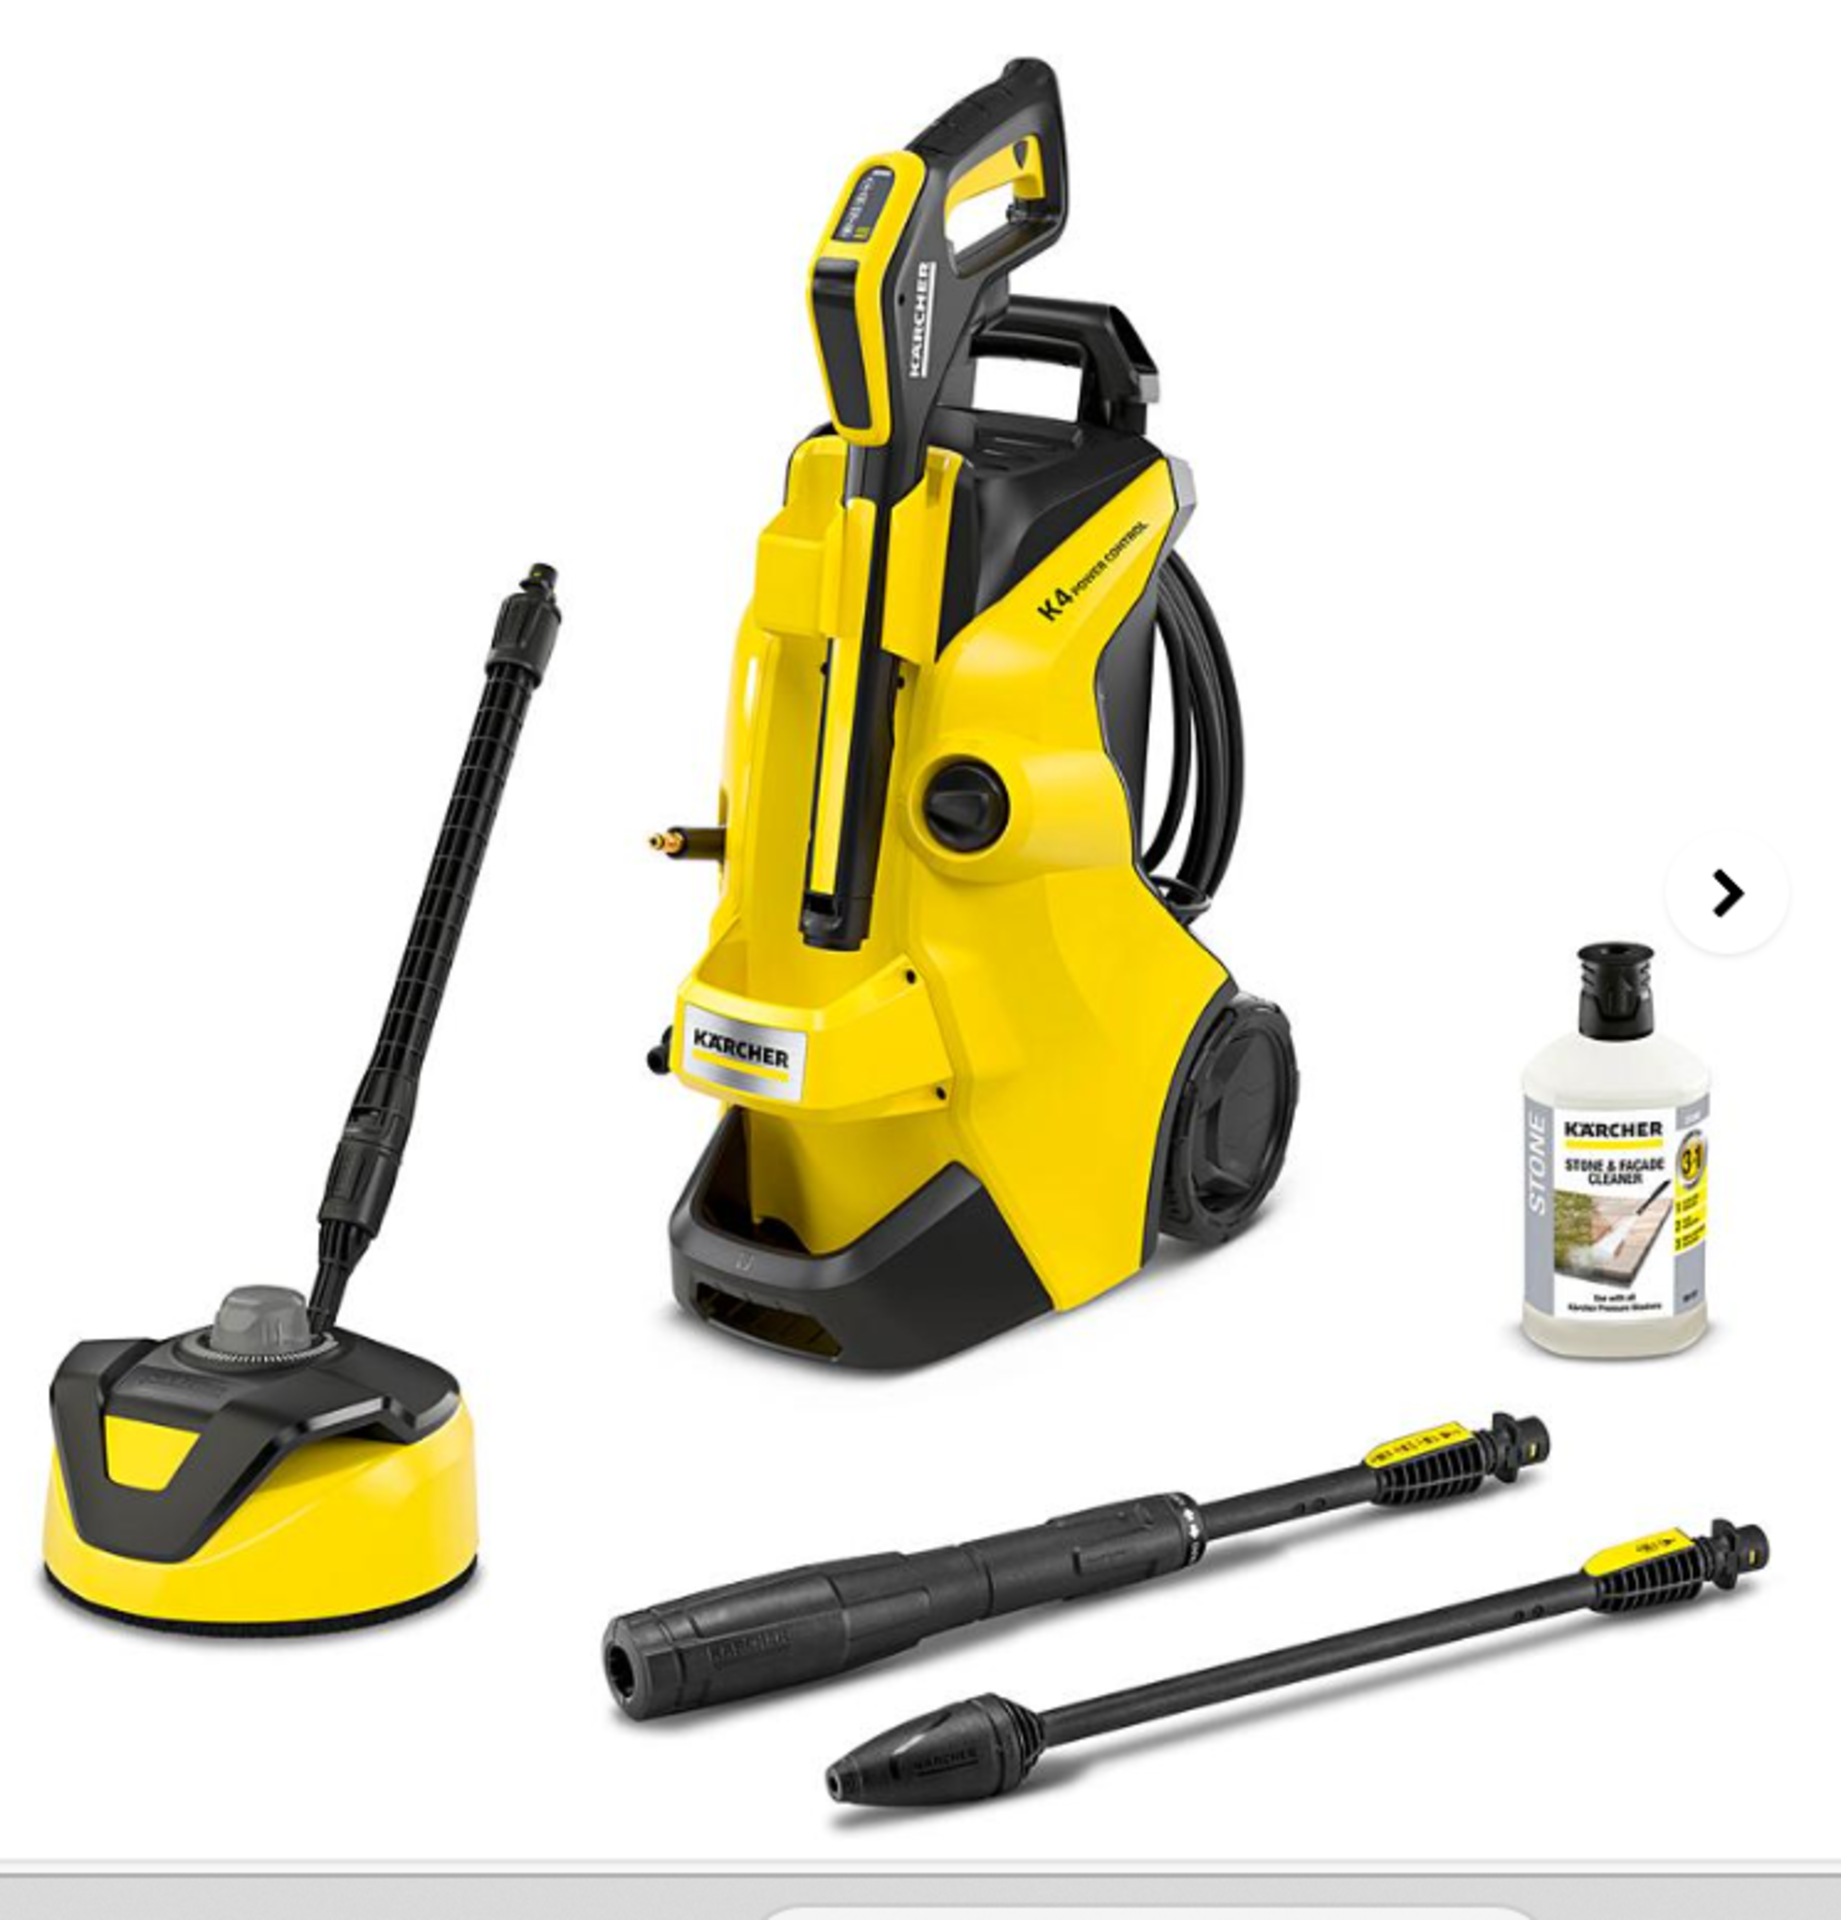 Karcher K 4 Power Control Home. - ER22. RRP £329.99. The Karcher K 4 Power Control Home pressure